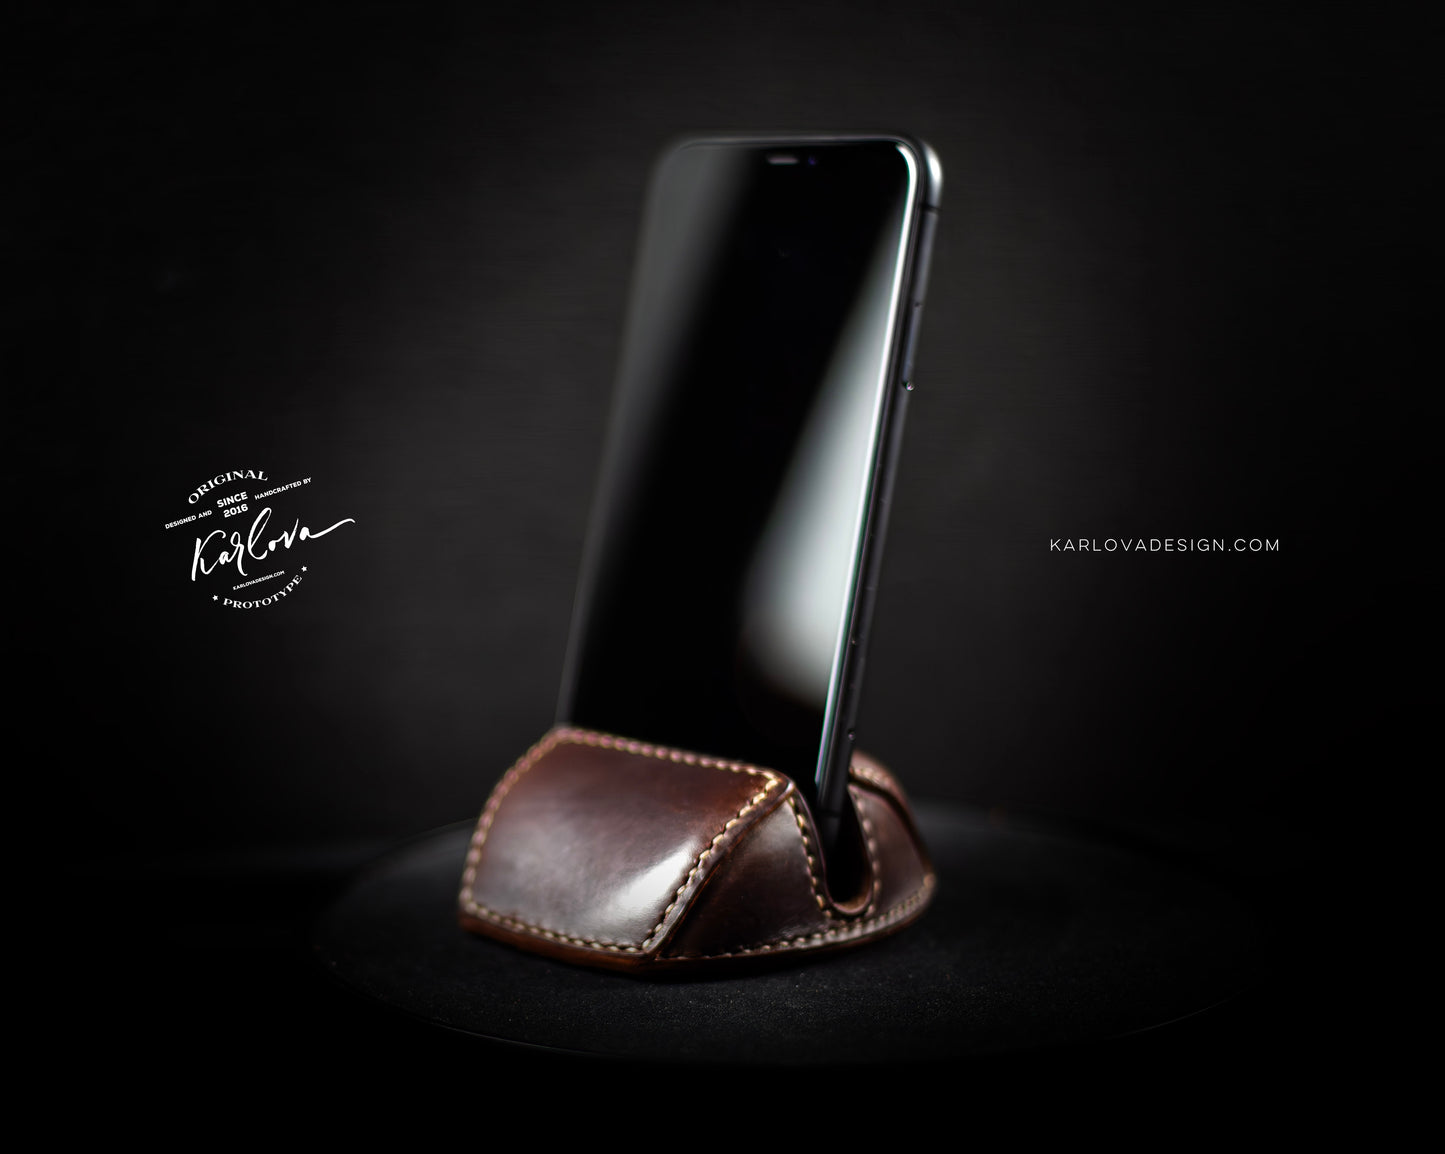 Compact Phone Stand - Leather Craft PDF Pattern Download with Video Tutorial